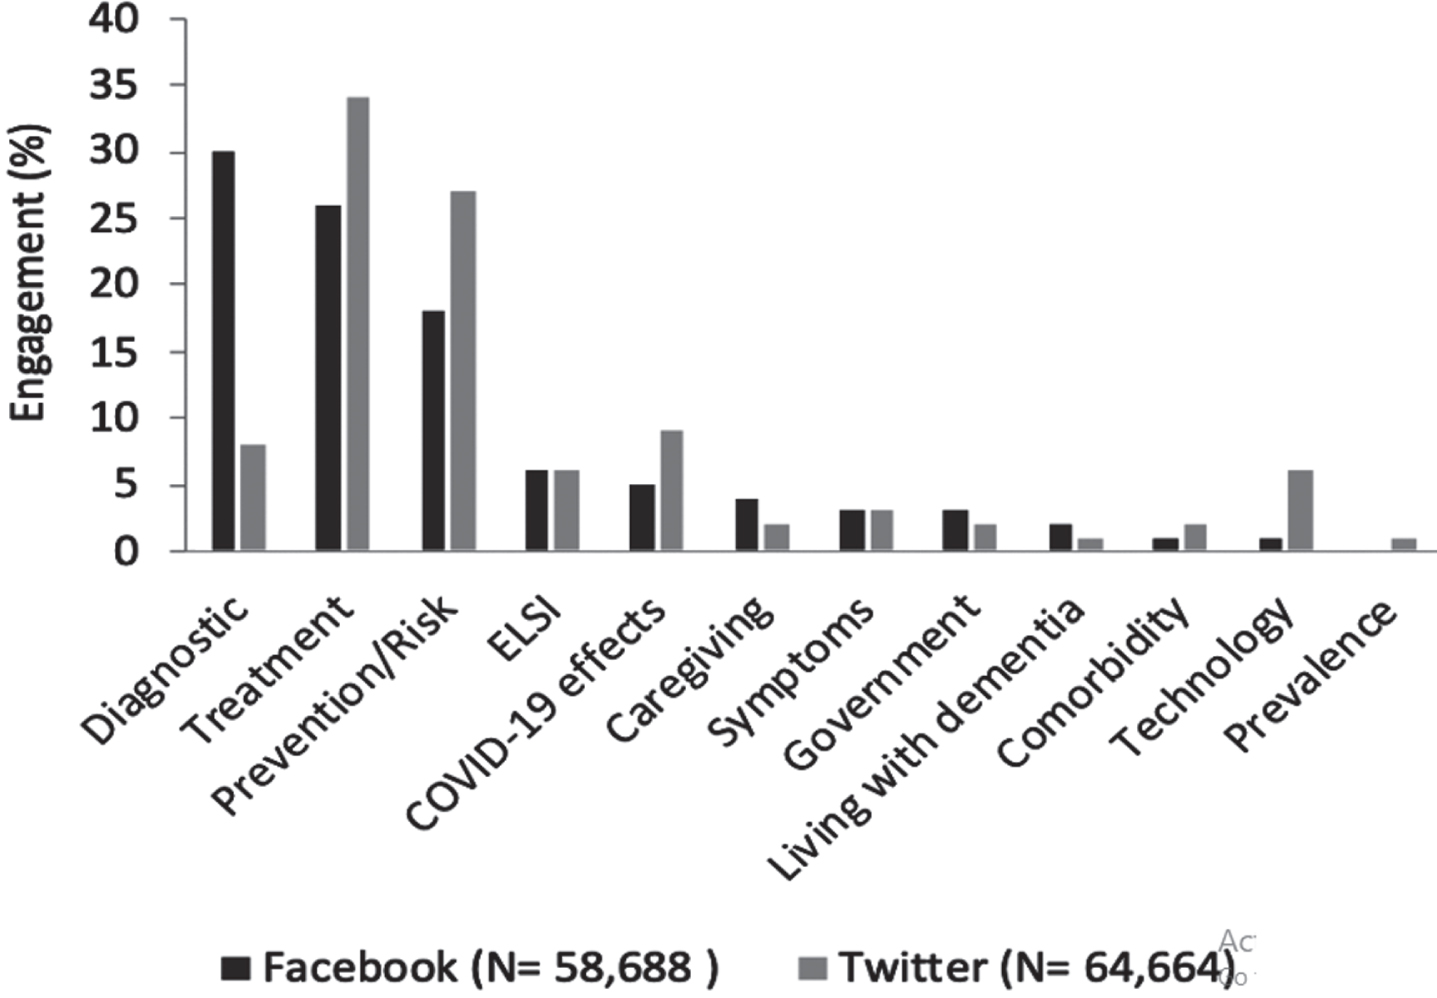 Engagement of aspect of dementia excluding posts shared by academics/researchers. Percentage of social media engagement for dementia research themes on Facebook and Twitter. Facebook engagement is a sum of reactions, shares, and comments. Twitter engagement is a sum of likes, retweets, replies, and quote tweets. Percentages for each theme are of a total of the N codes indicated for each platform. ELSI, ethical, legal, and social issues.